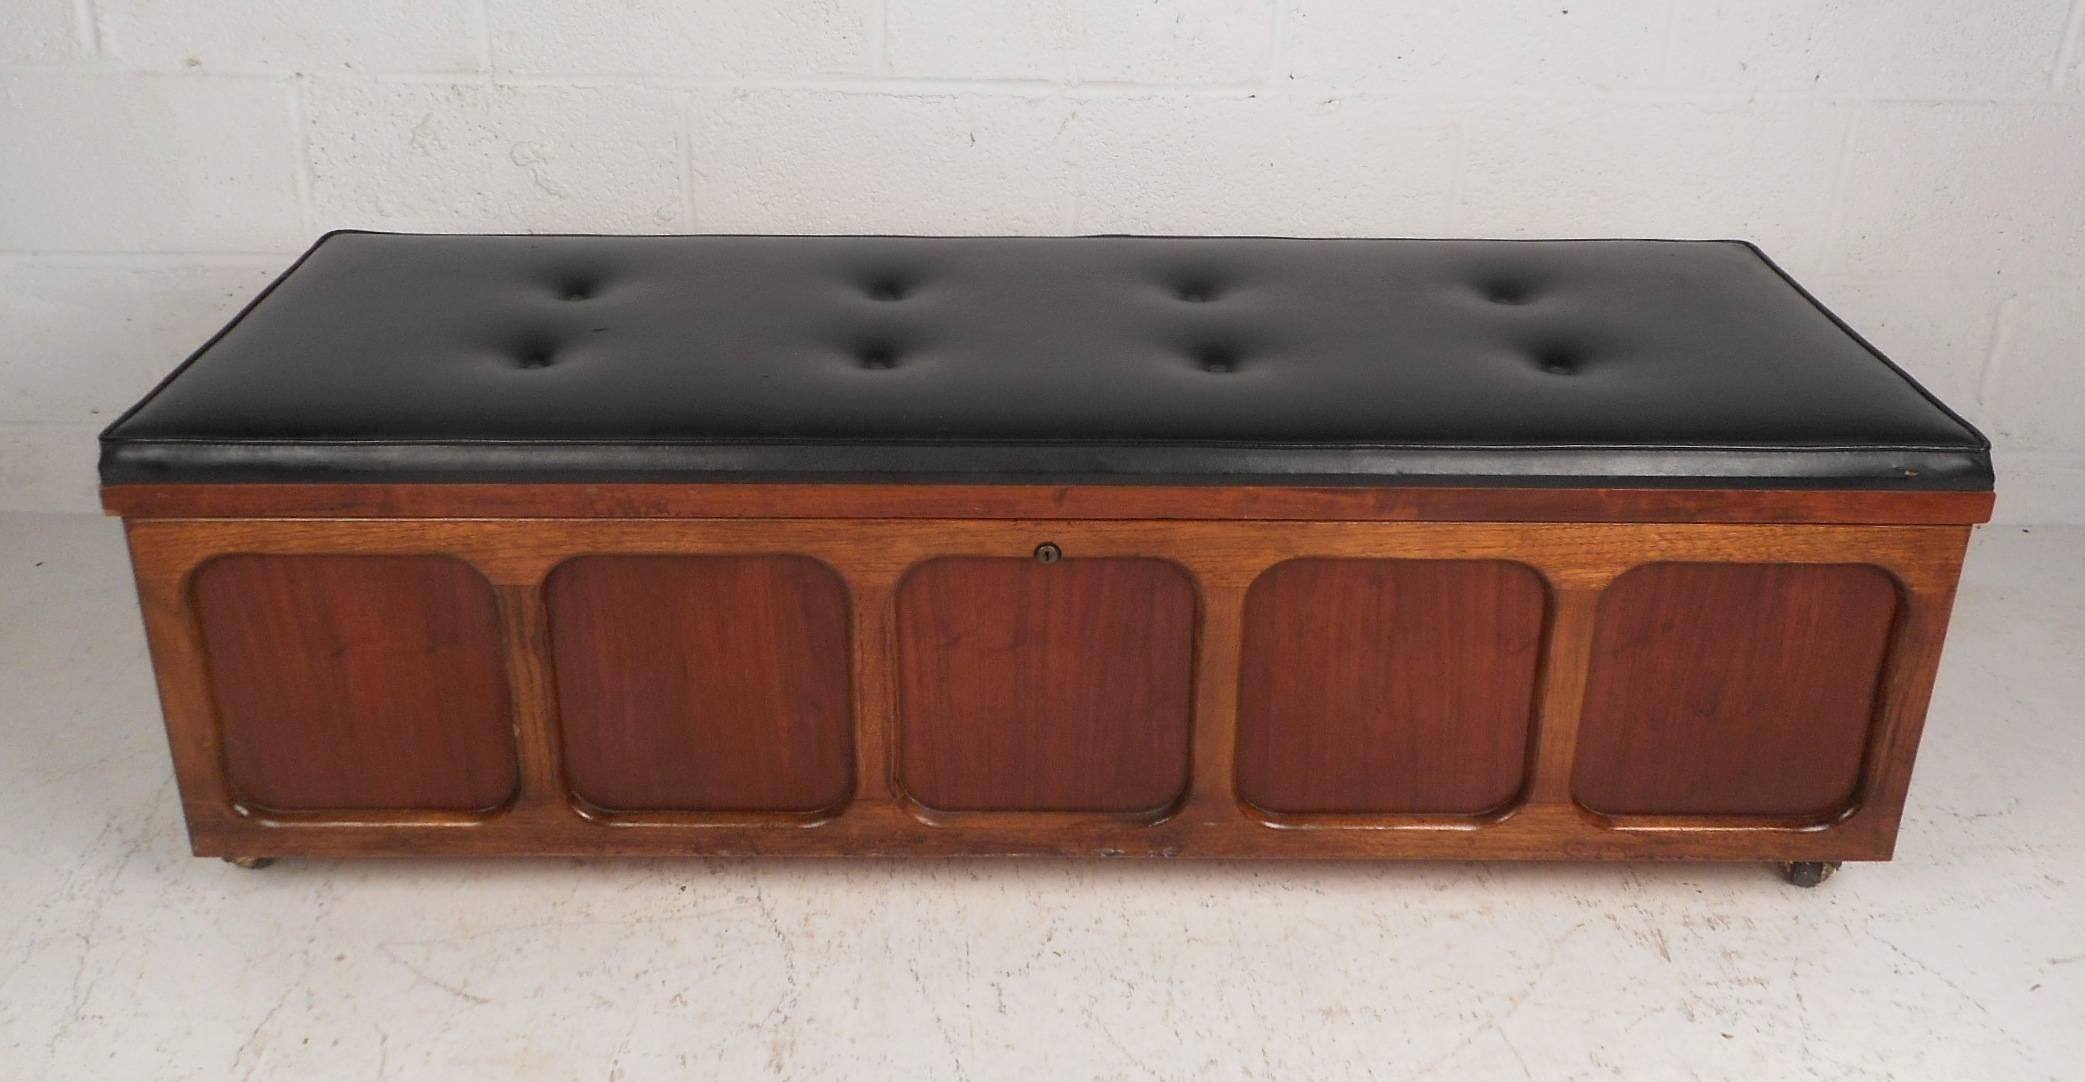 A beautiful Mid-Century Modern cedar chest with a thick padded cushion on top covered in black tufted vinyl. Quality construction with a unique embossed design on the front, four castors for convenience, and a finished back. This versatile piece